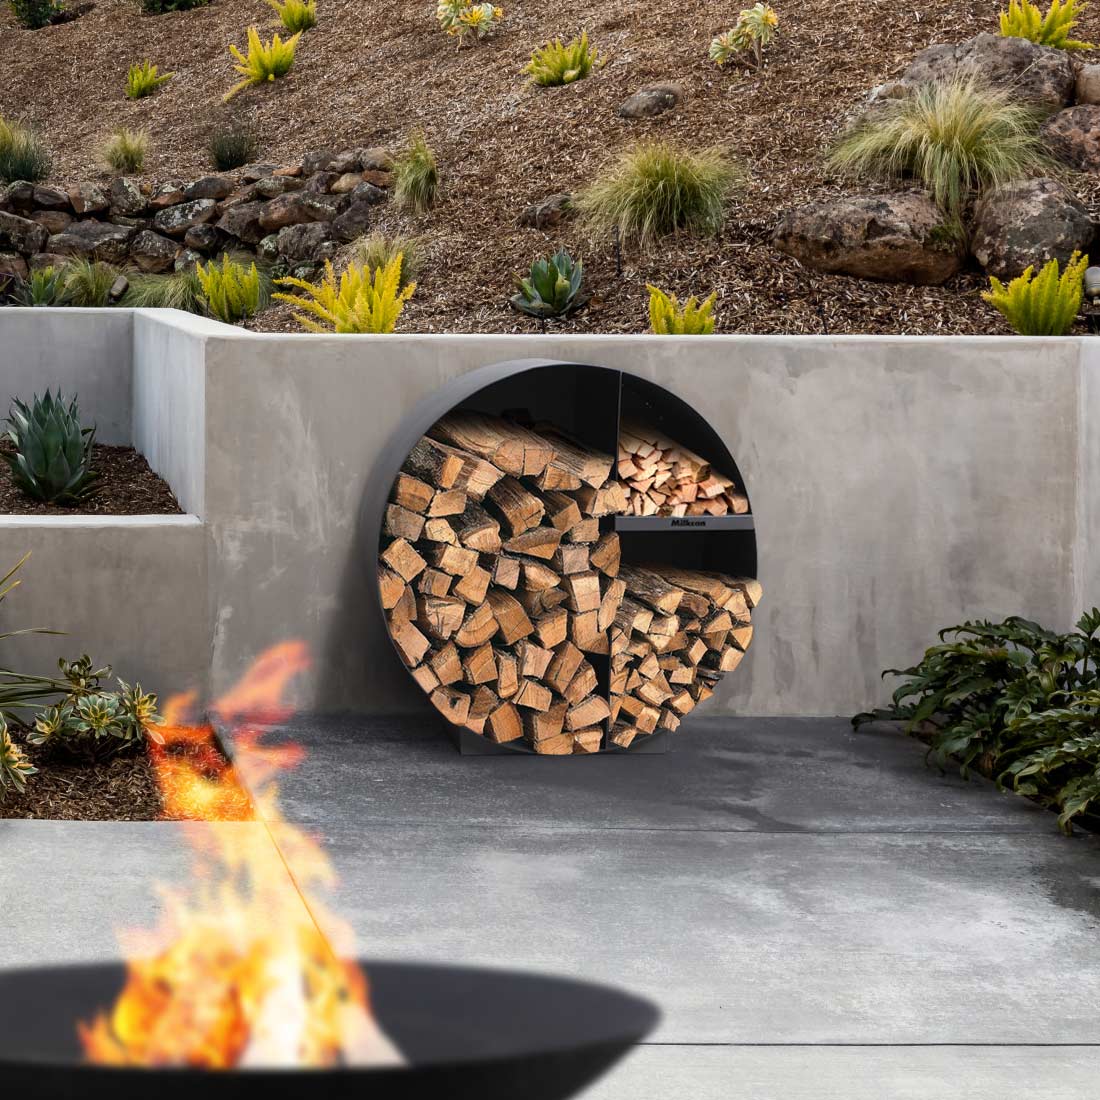 What’s The Best Way To Store Firewood For A Wood Fire Pit?